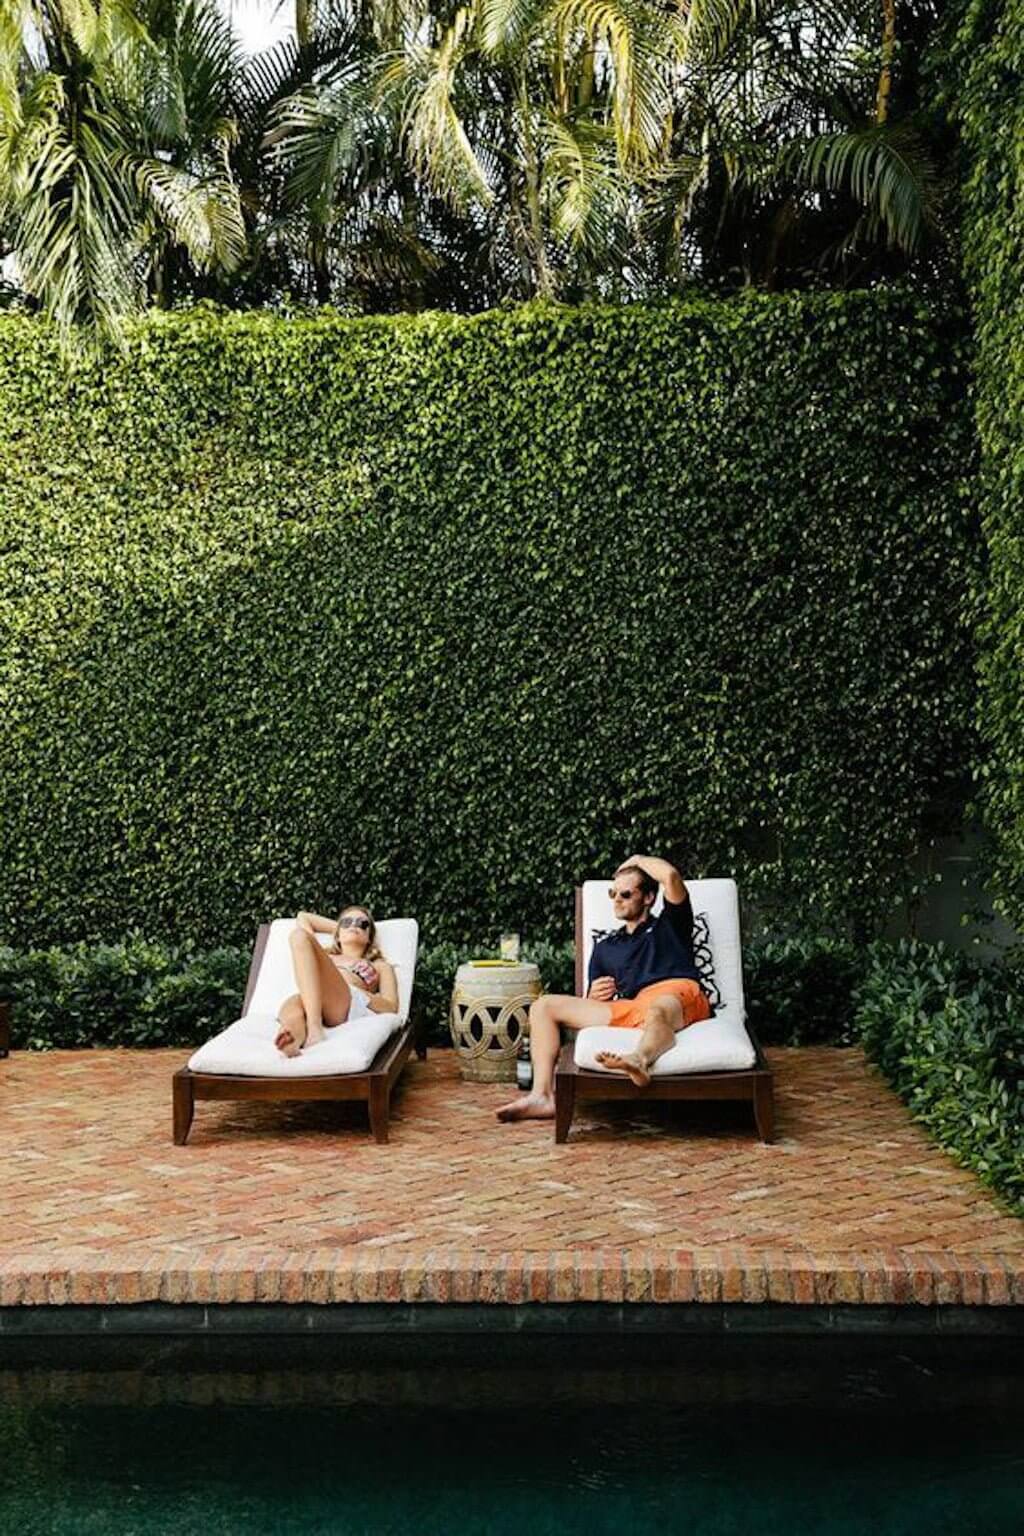 large ficus hedge alongside pool with two people on lounge chairs and brick patio